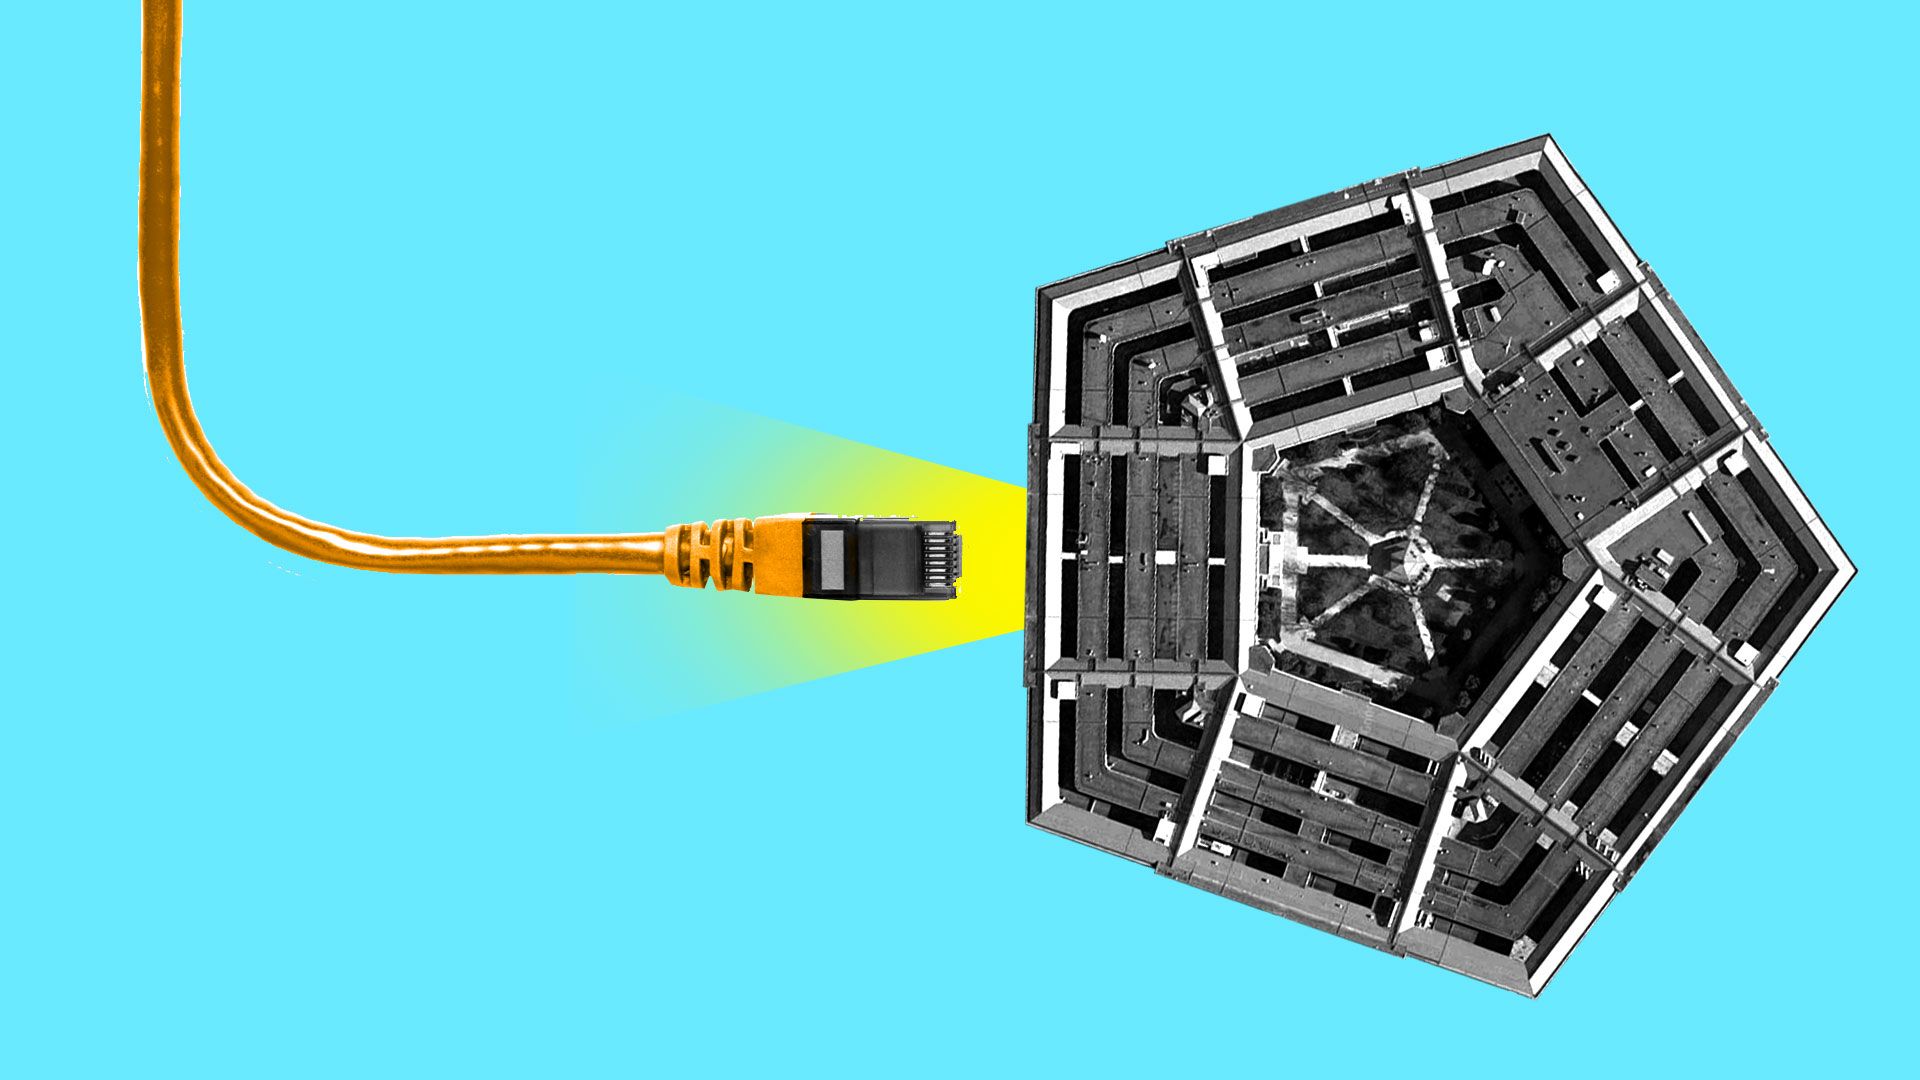 An illustration of an ethernet cable plugging into the Pentagon